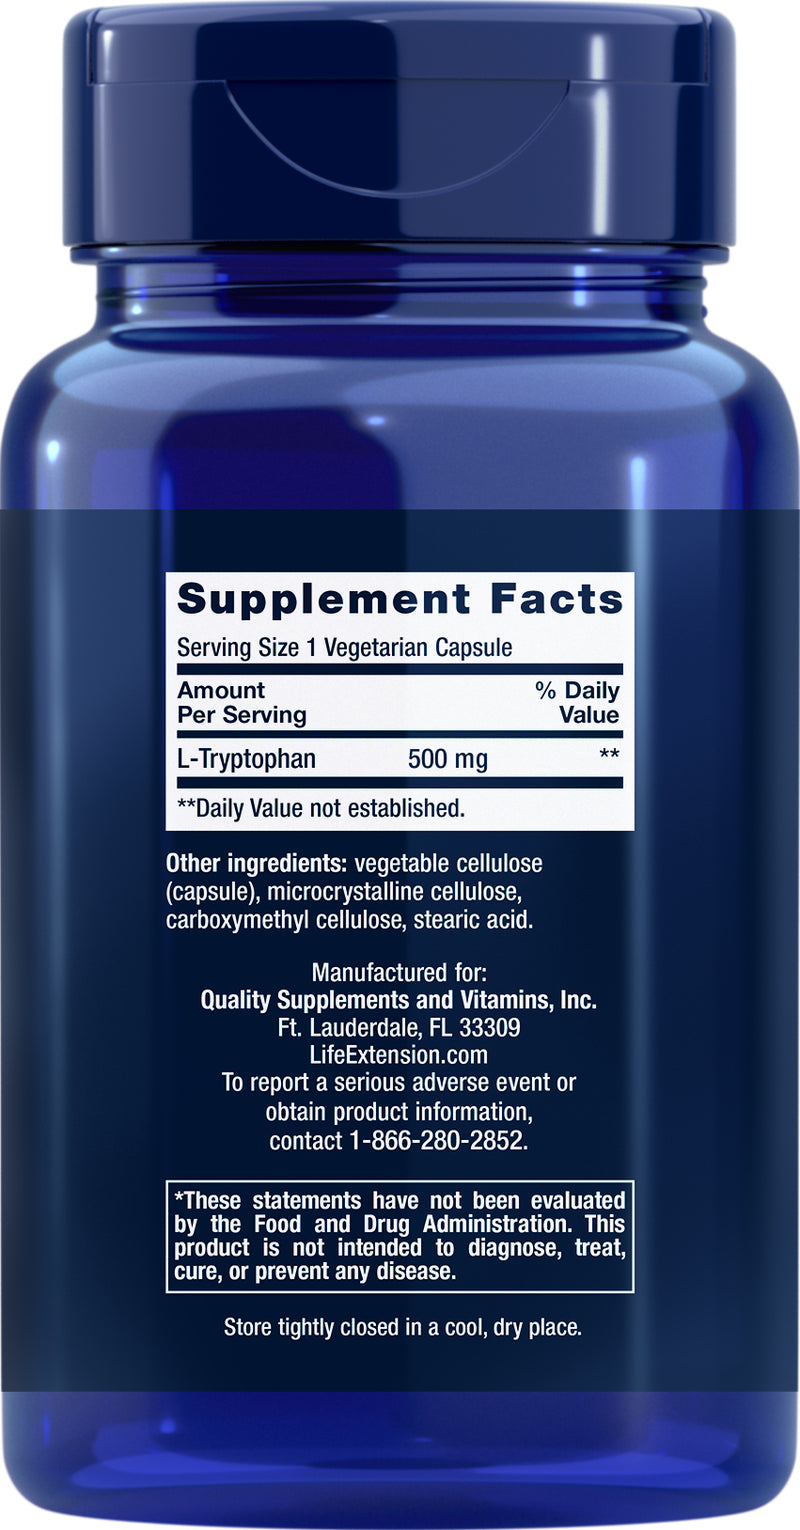 L-Tryptophan 500 mg, 90  vegetarian capsules by Life Extension